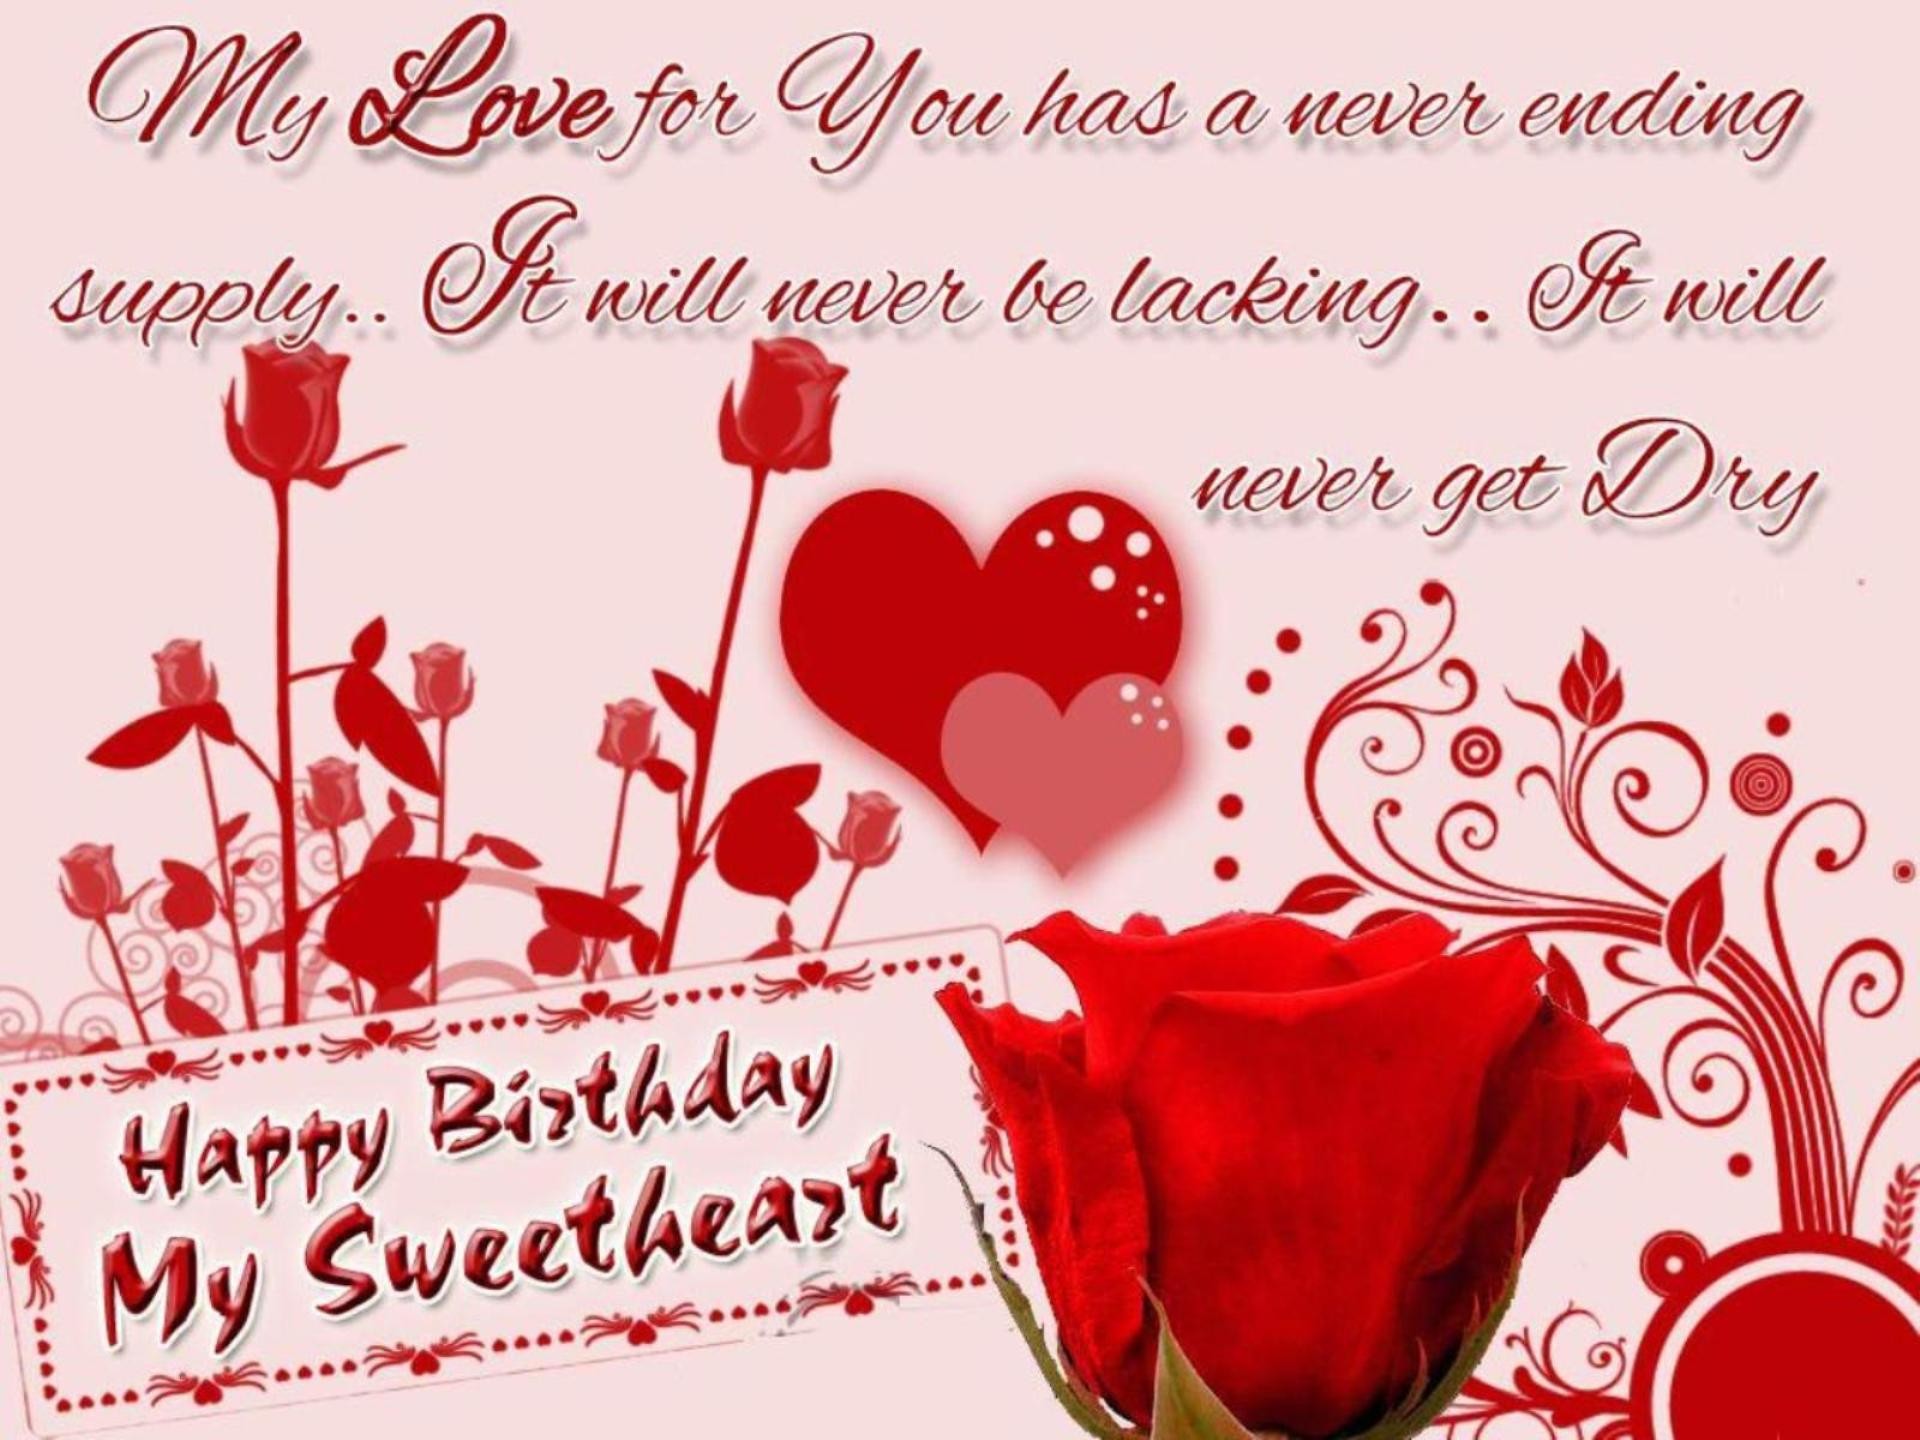 1920x1440 Love Quote For Wife On Birthday Lovely And Meaningful Birthday Wishes For  Wife That Can Bring Smile Oon Her Face The Best Christmas Picture Ideas